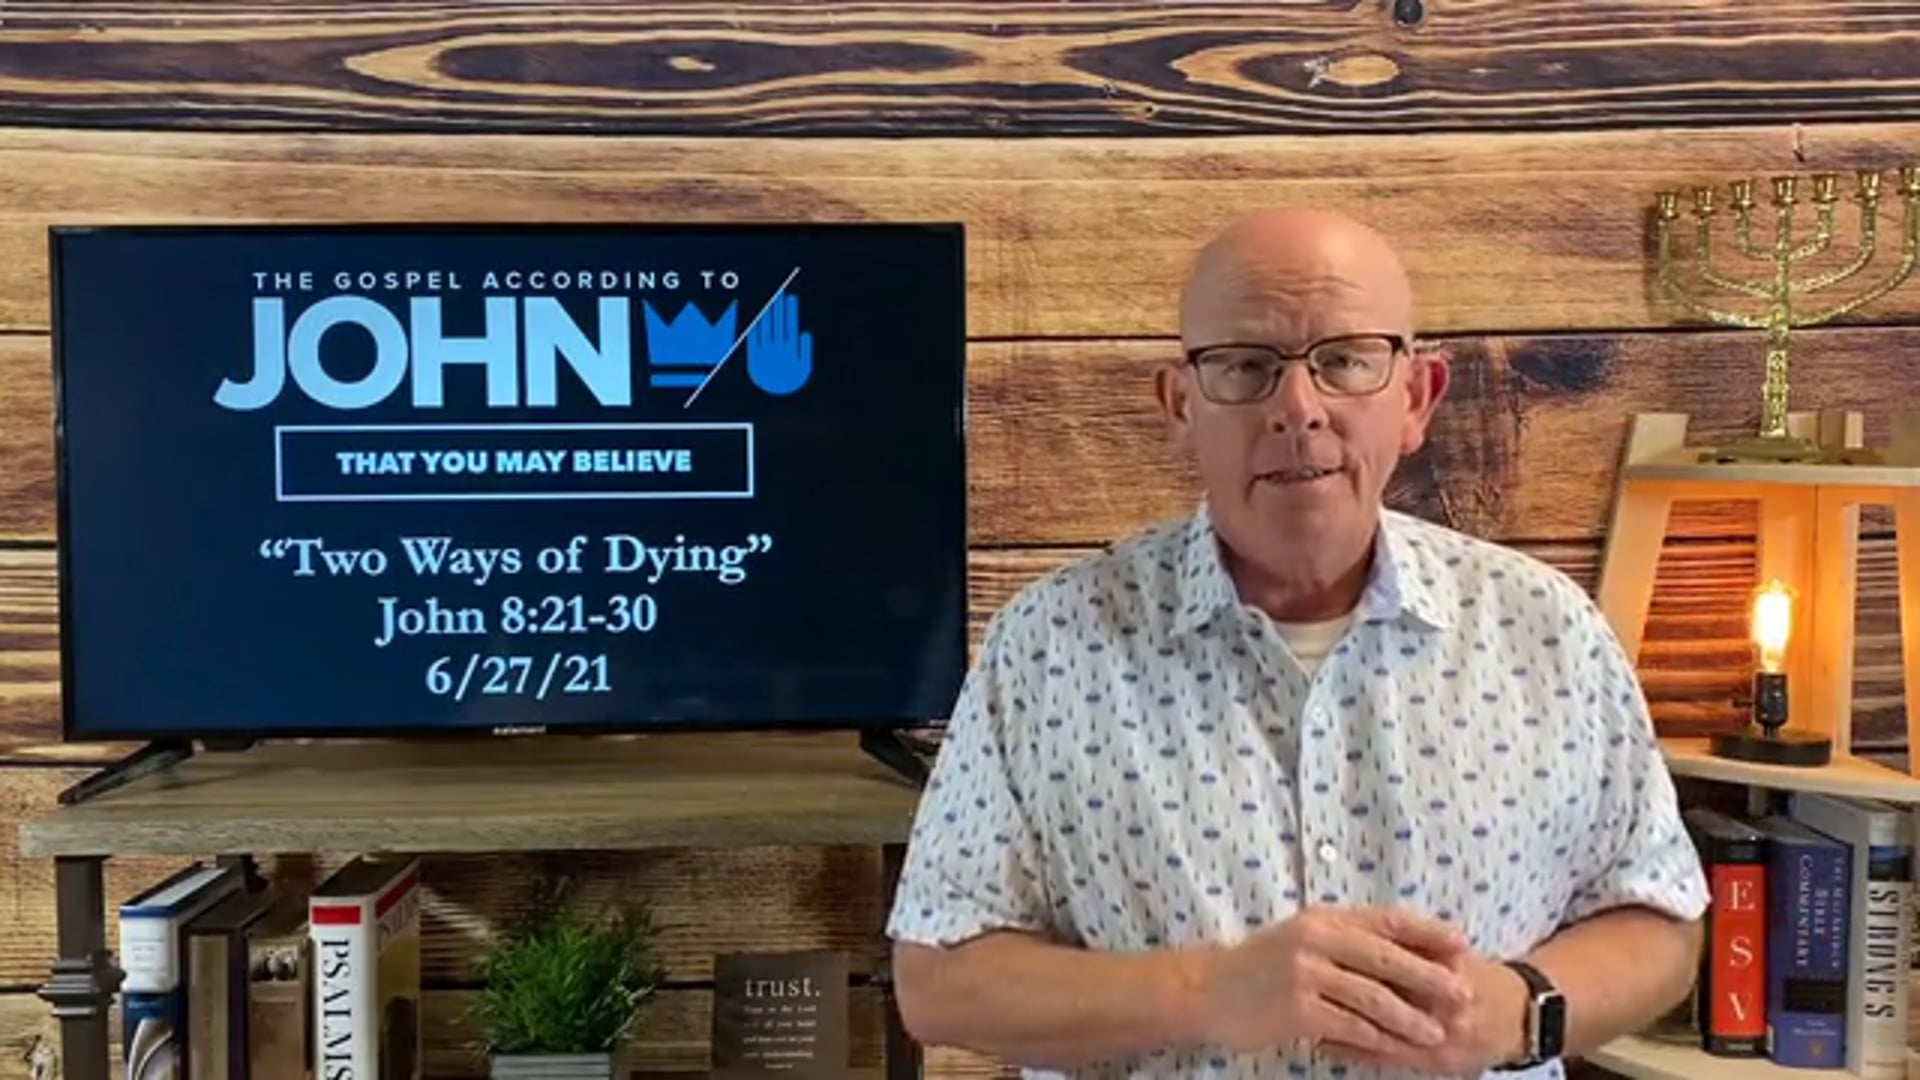 Two-Ways-of-Dying-John-821-30